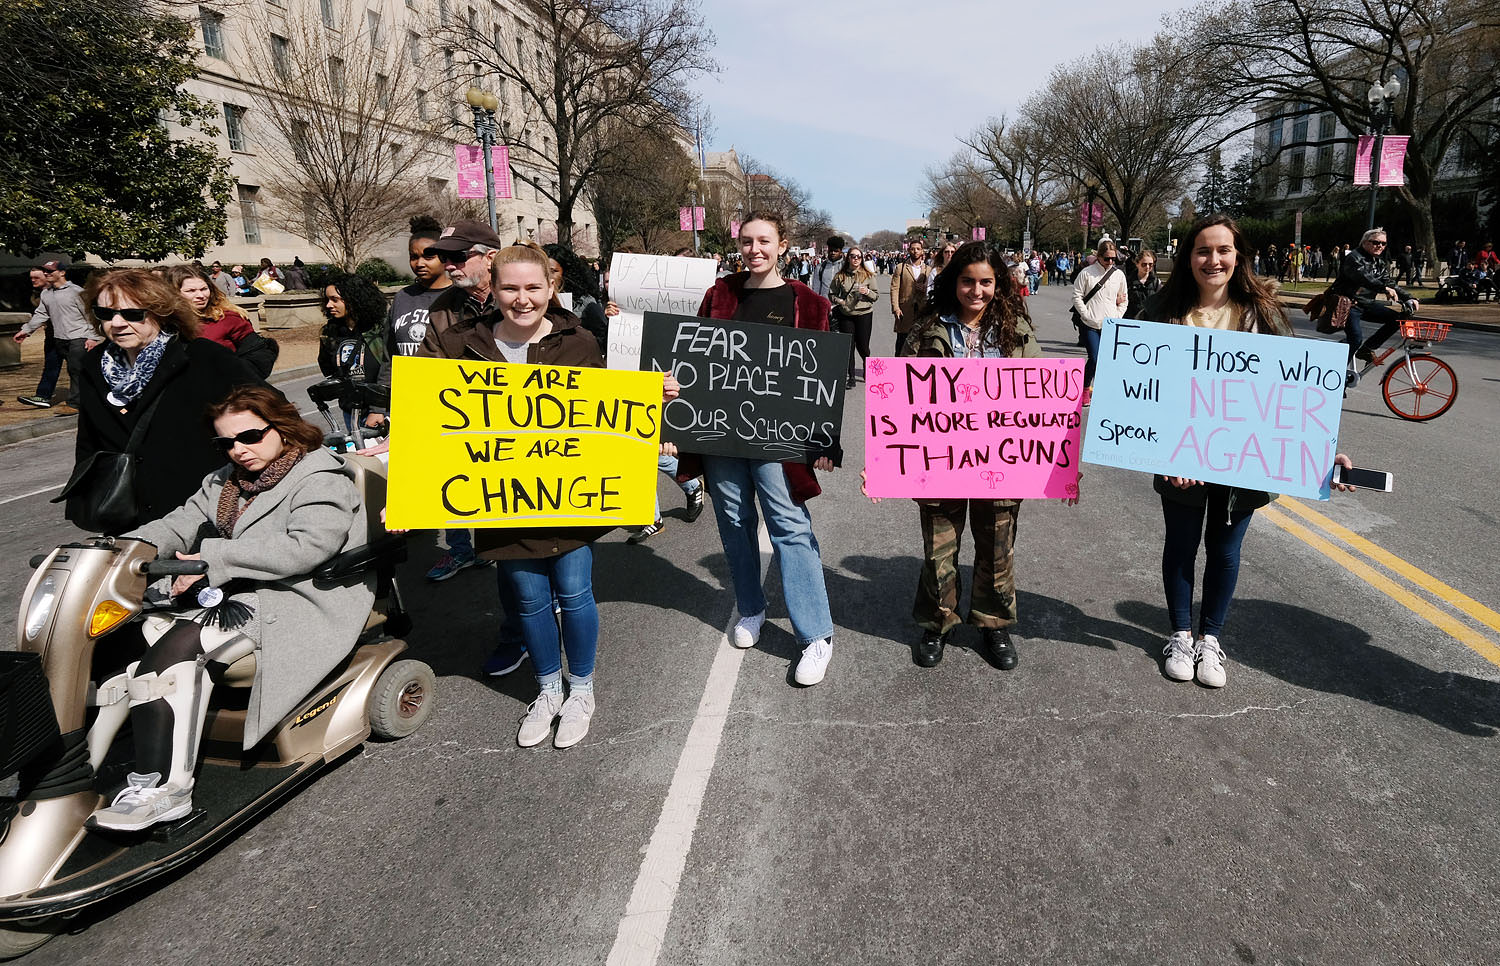 March for Our Lives: The DC march was a powerful and inspiring